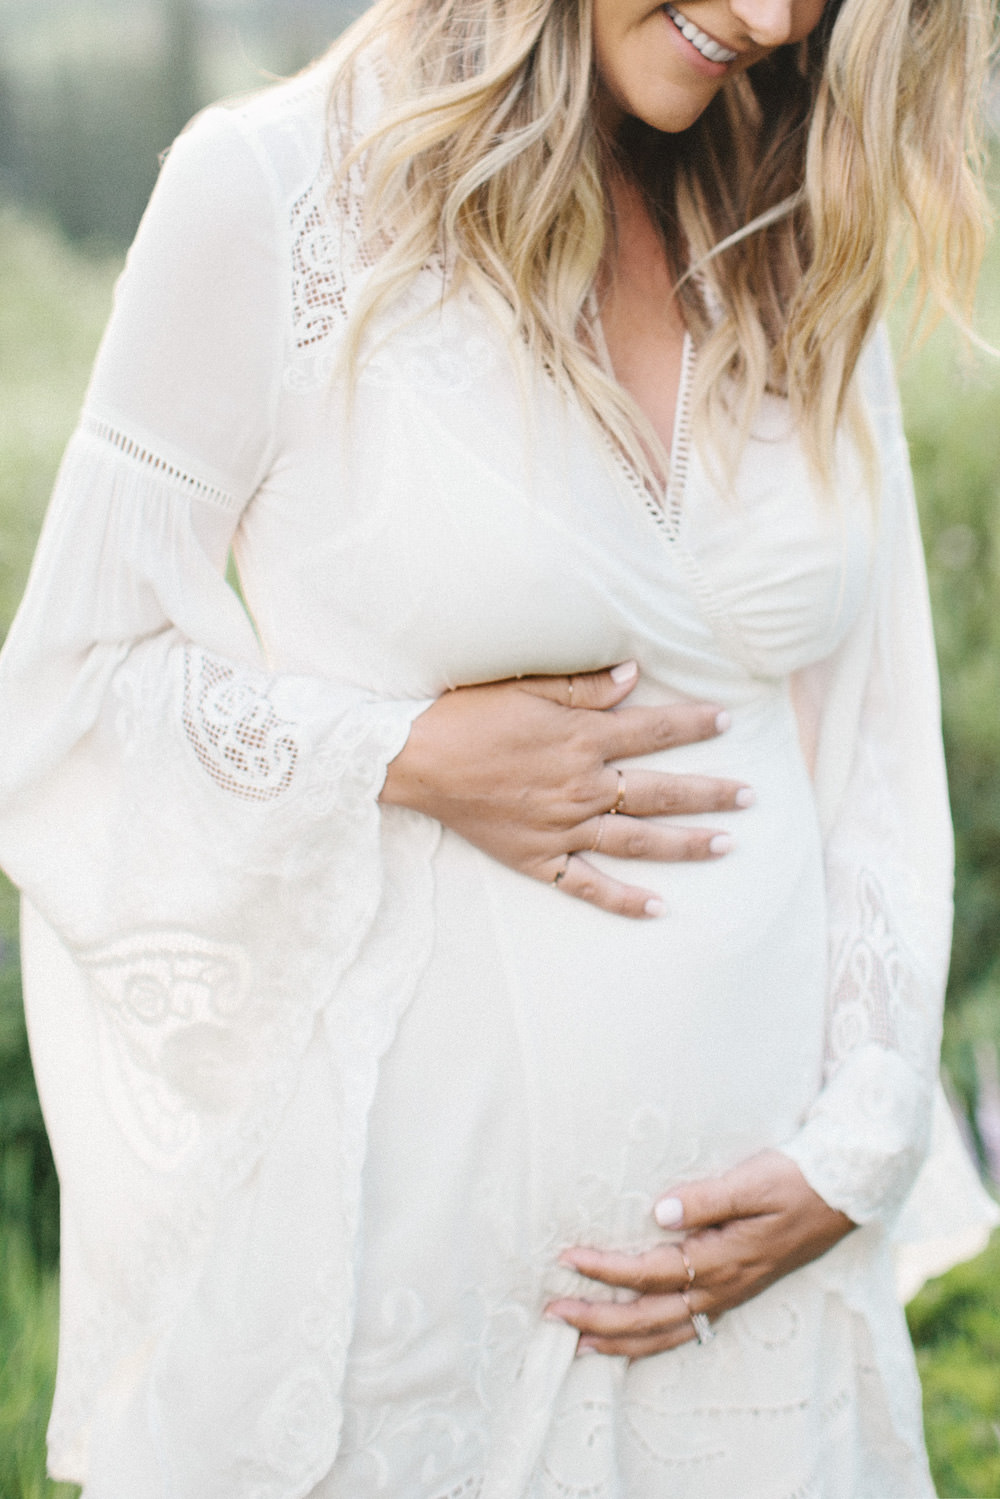 Caitlin Lindquist of the blog Dash of Darling shares her 29 week pregnancy update on her first pregnancy